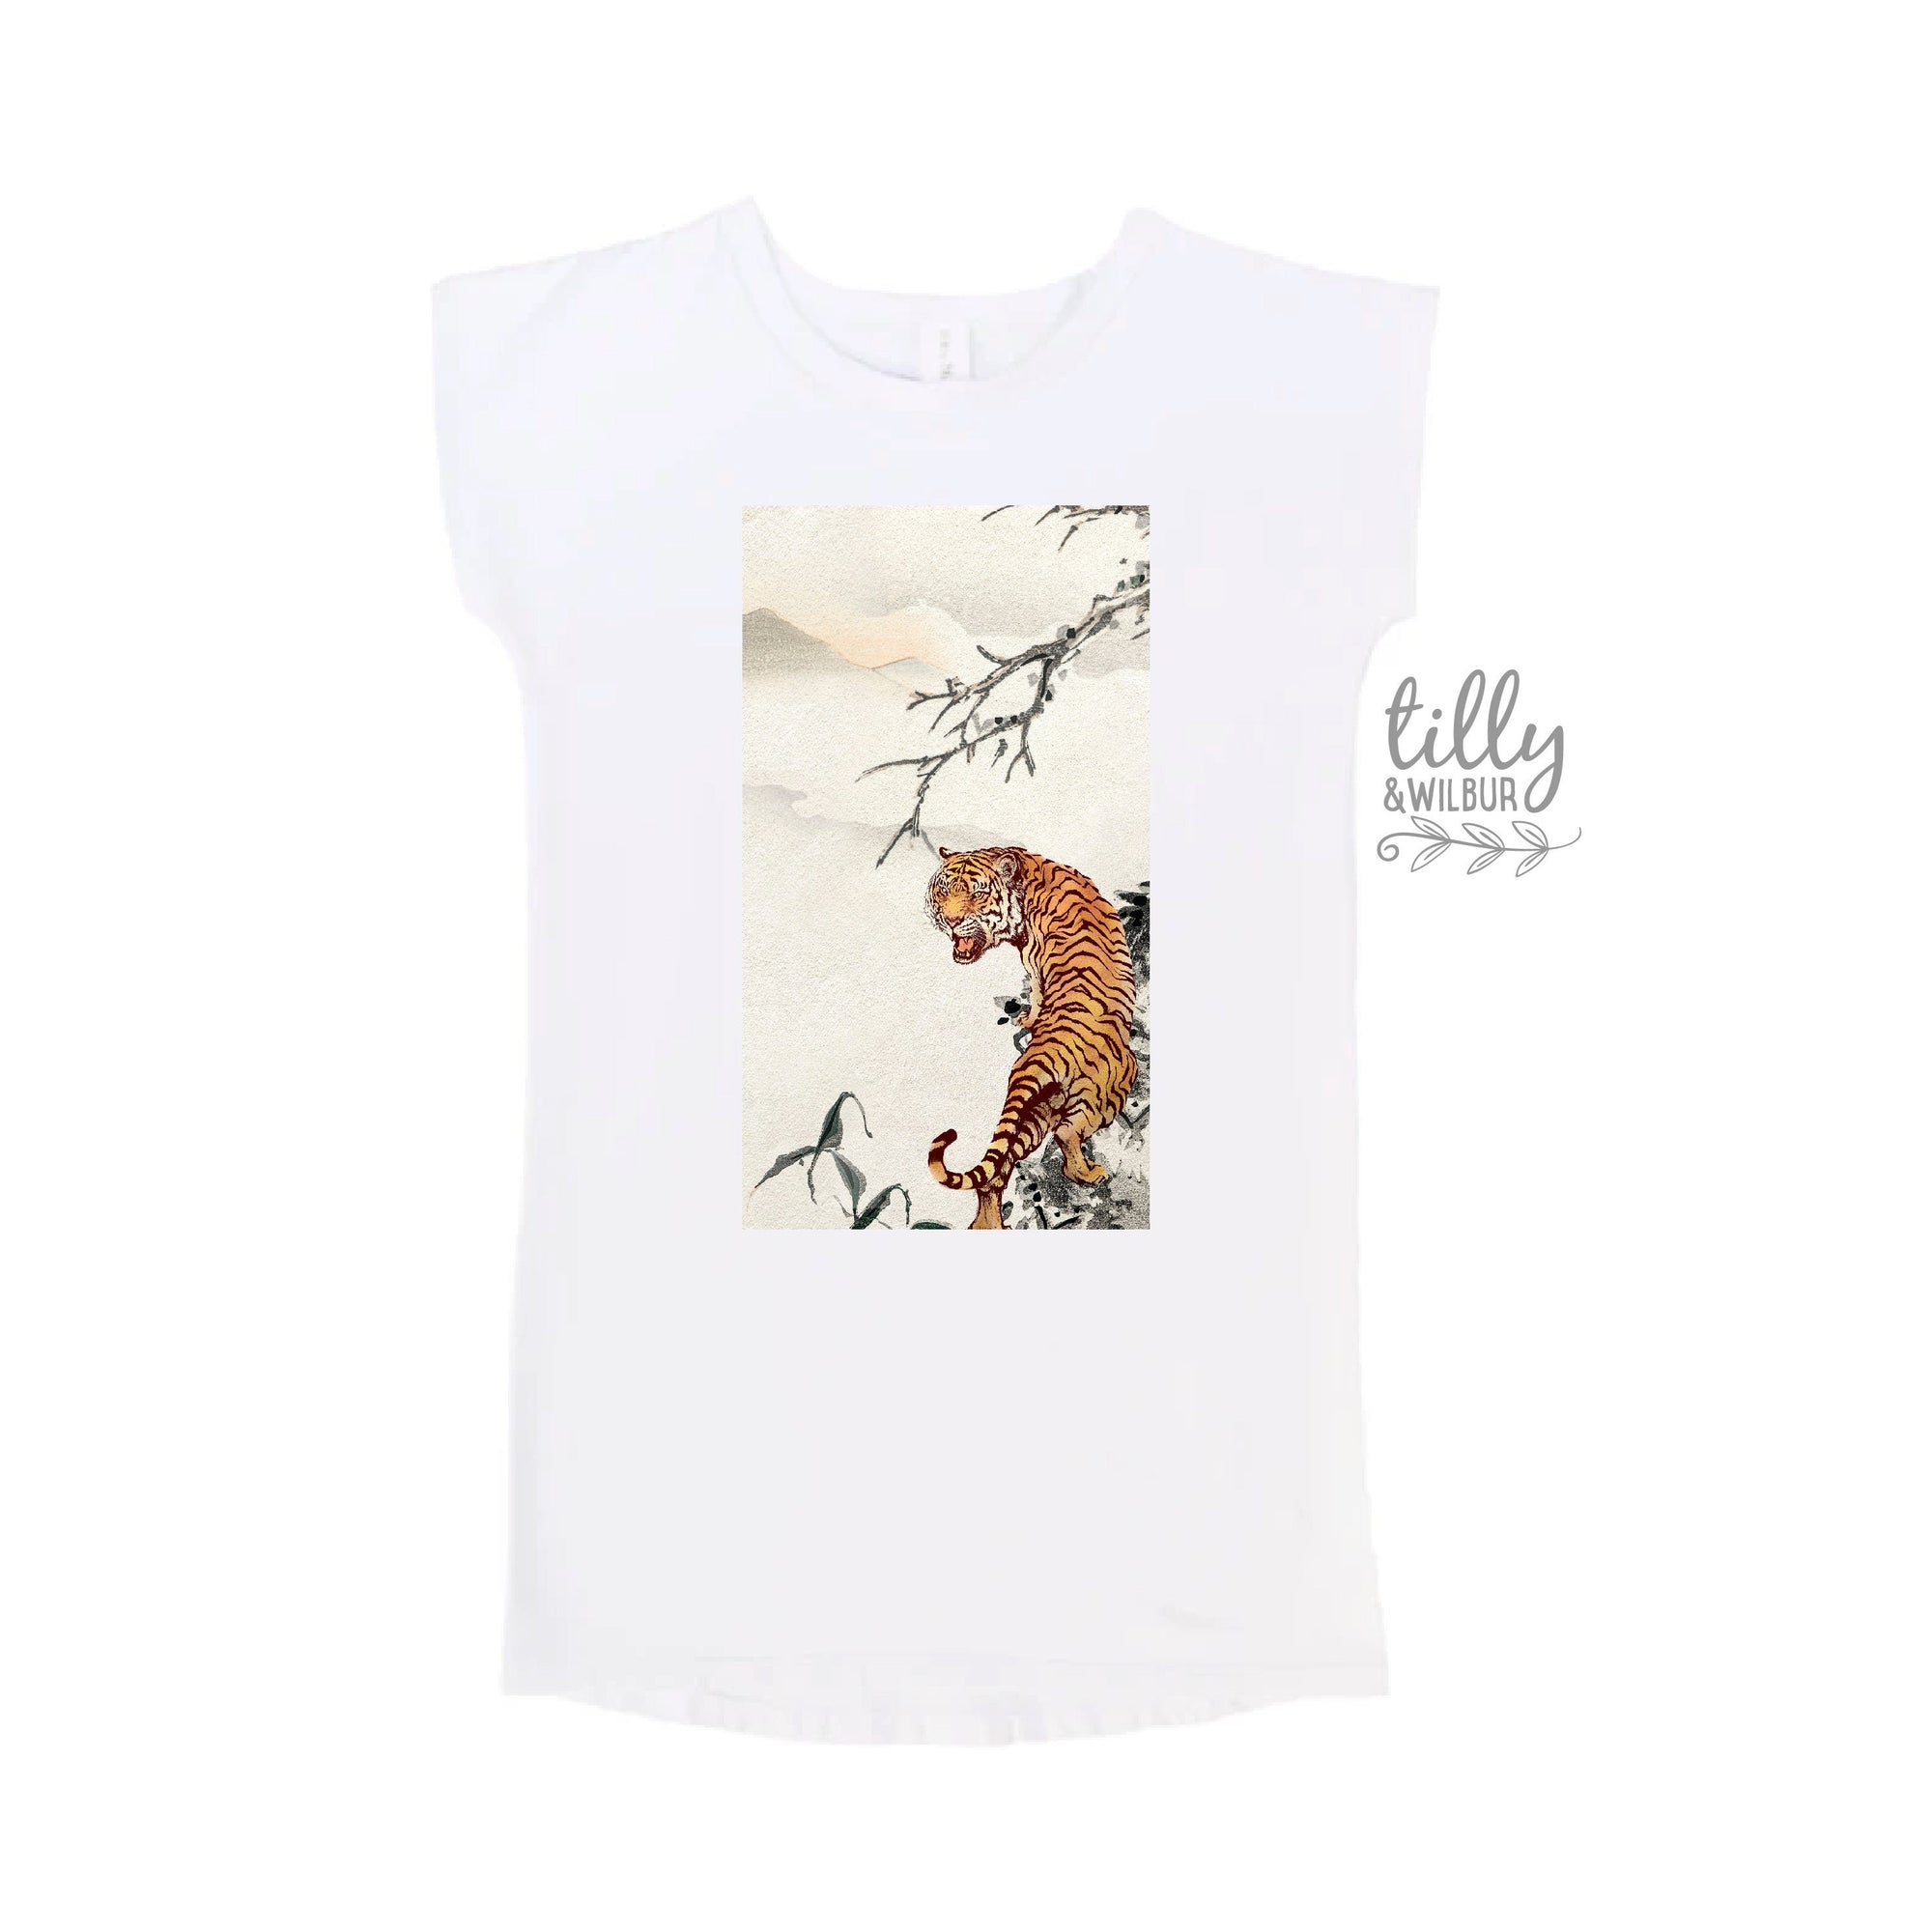 Year Of The Tiger T-Shirt Dress, Lunar New Year T-Shirt, Happy Lunar New Year T-Shirt, Year Of The Tiger 2022, Chinese Lunar New Year 2022